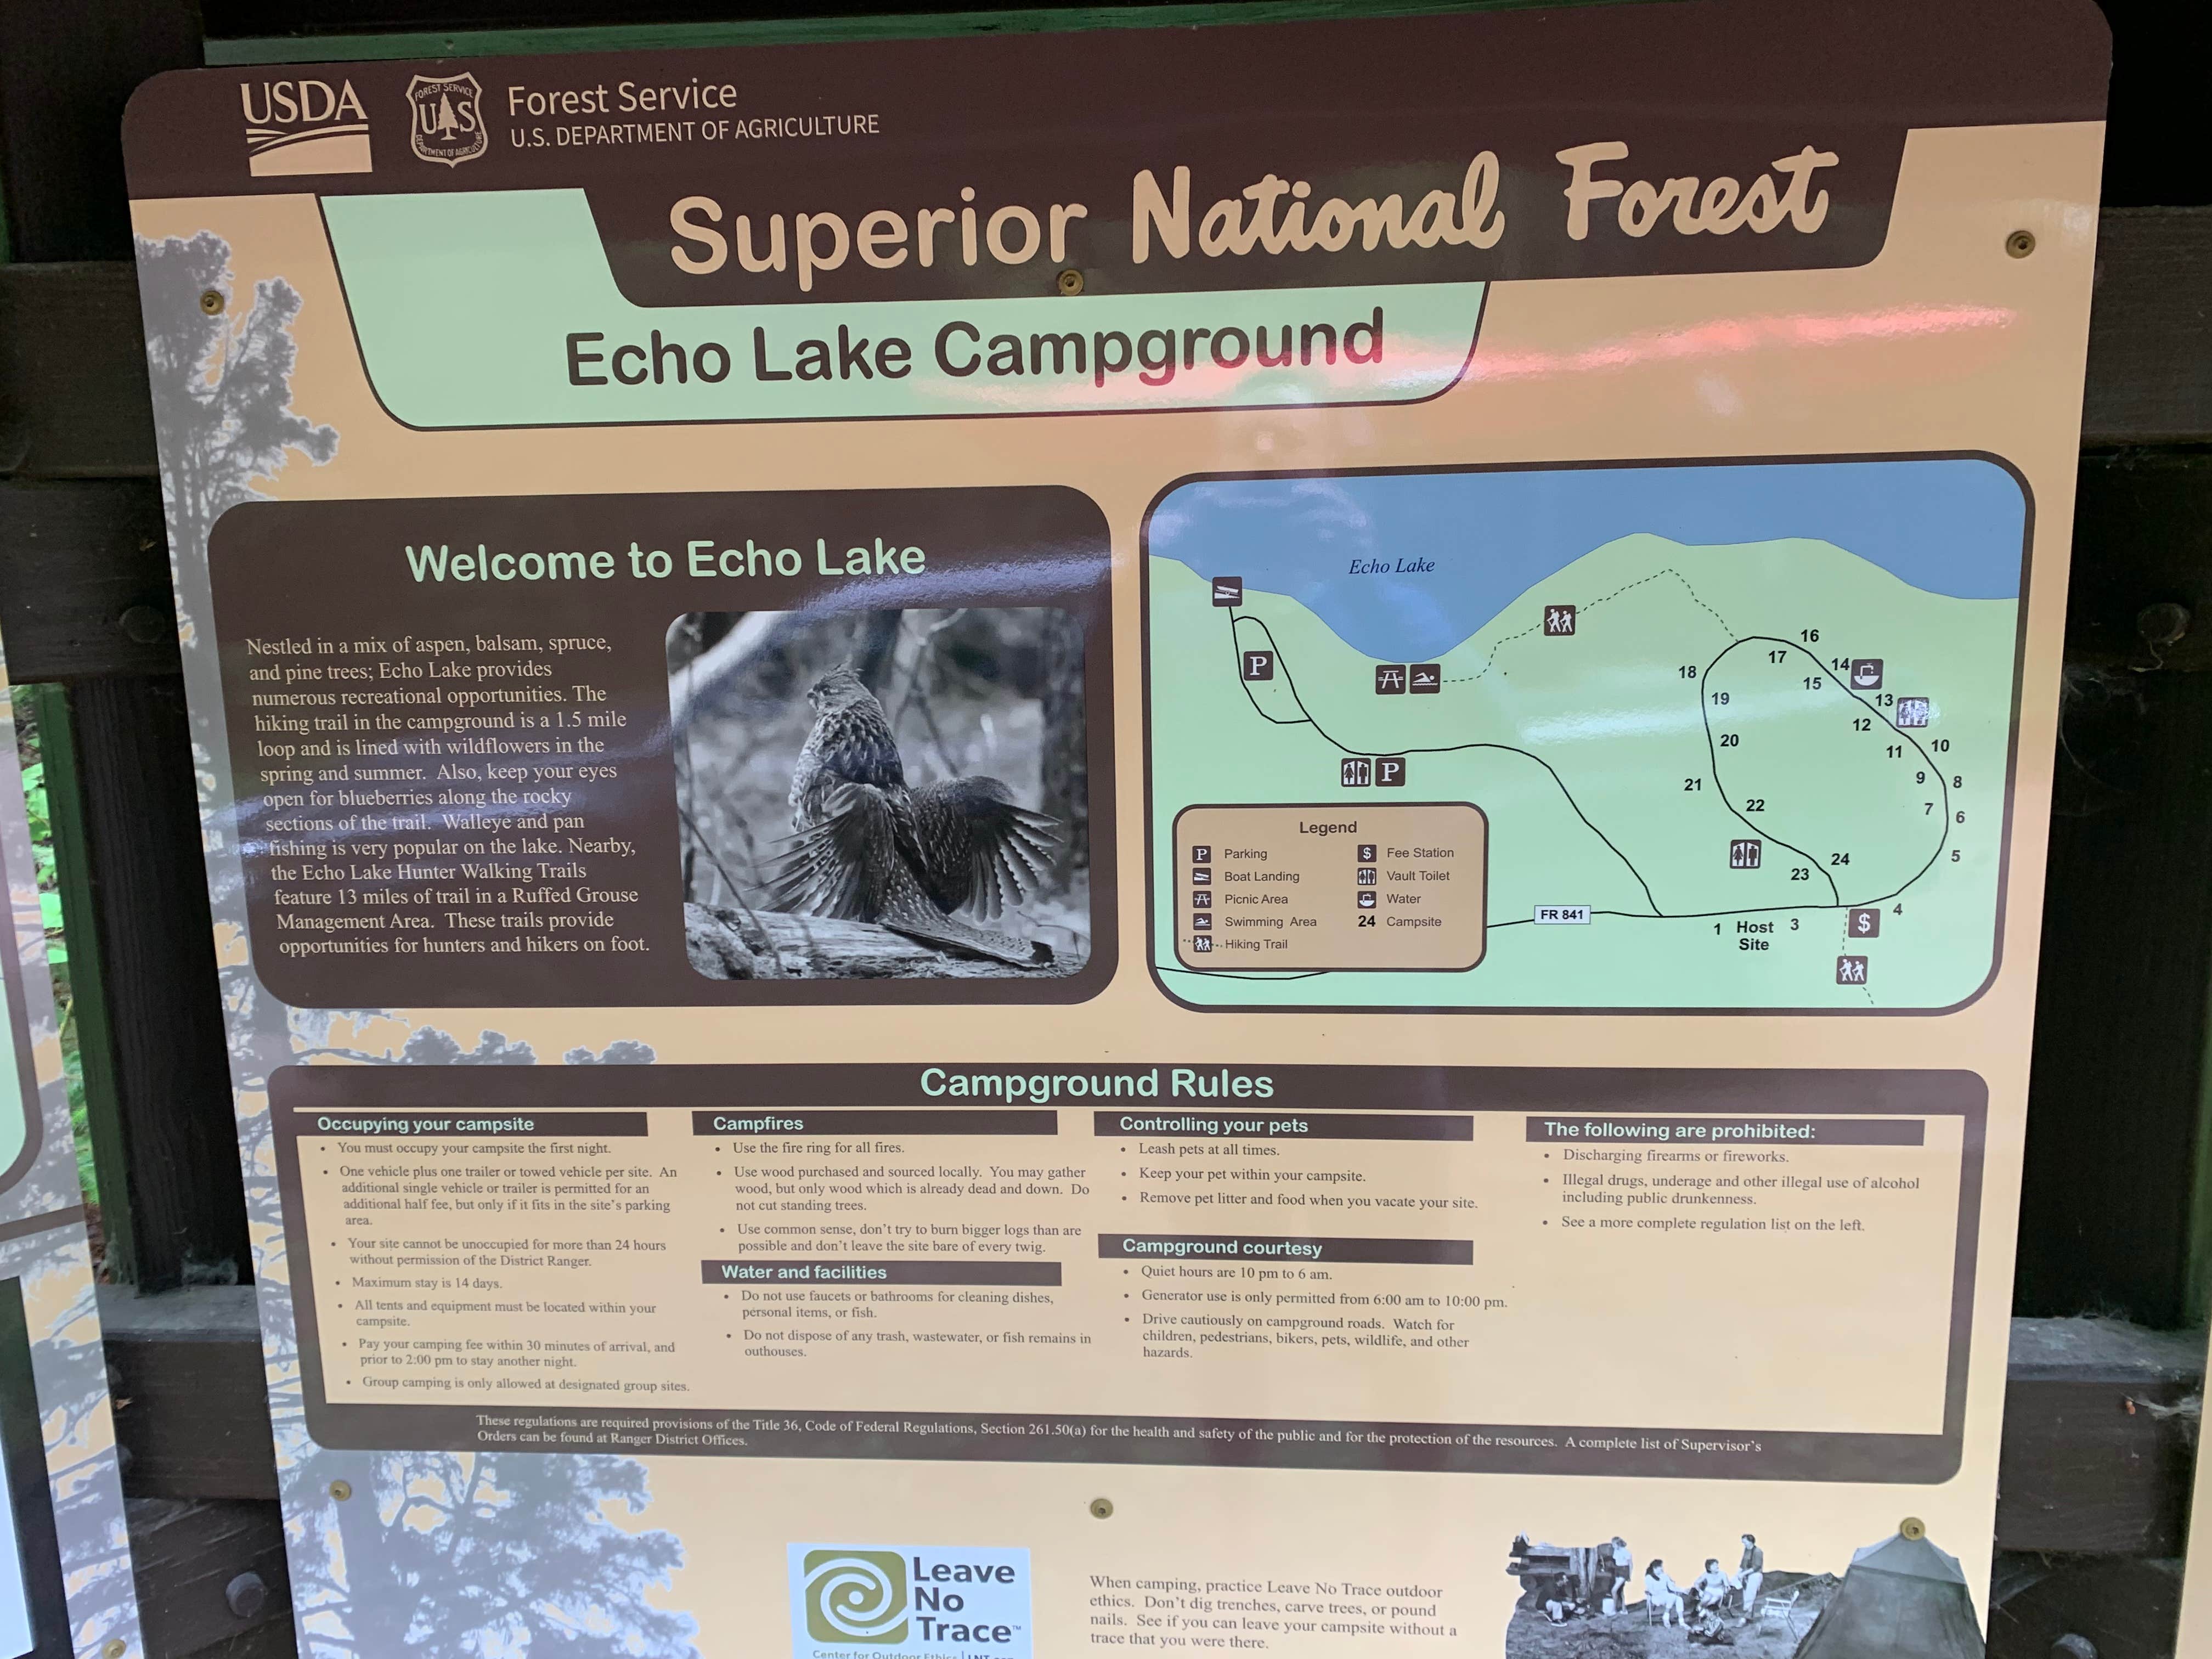 Camper submitted image from Echo Lake Campground - 5